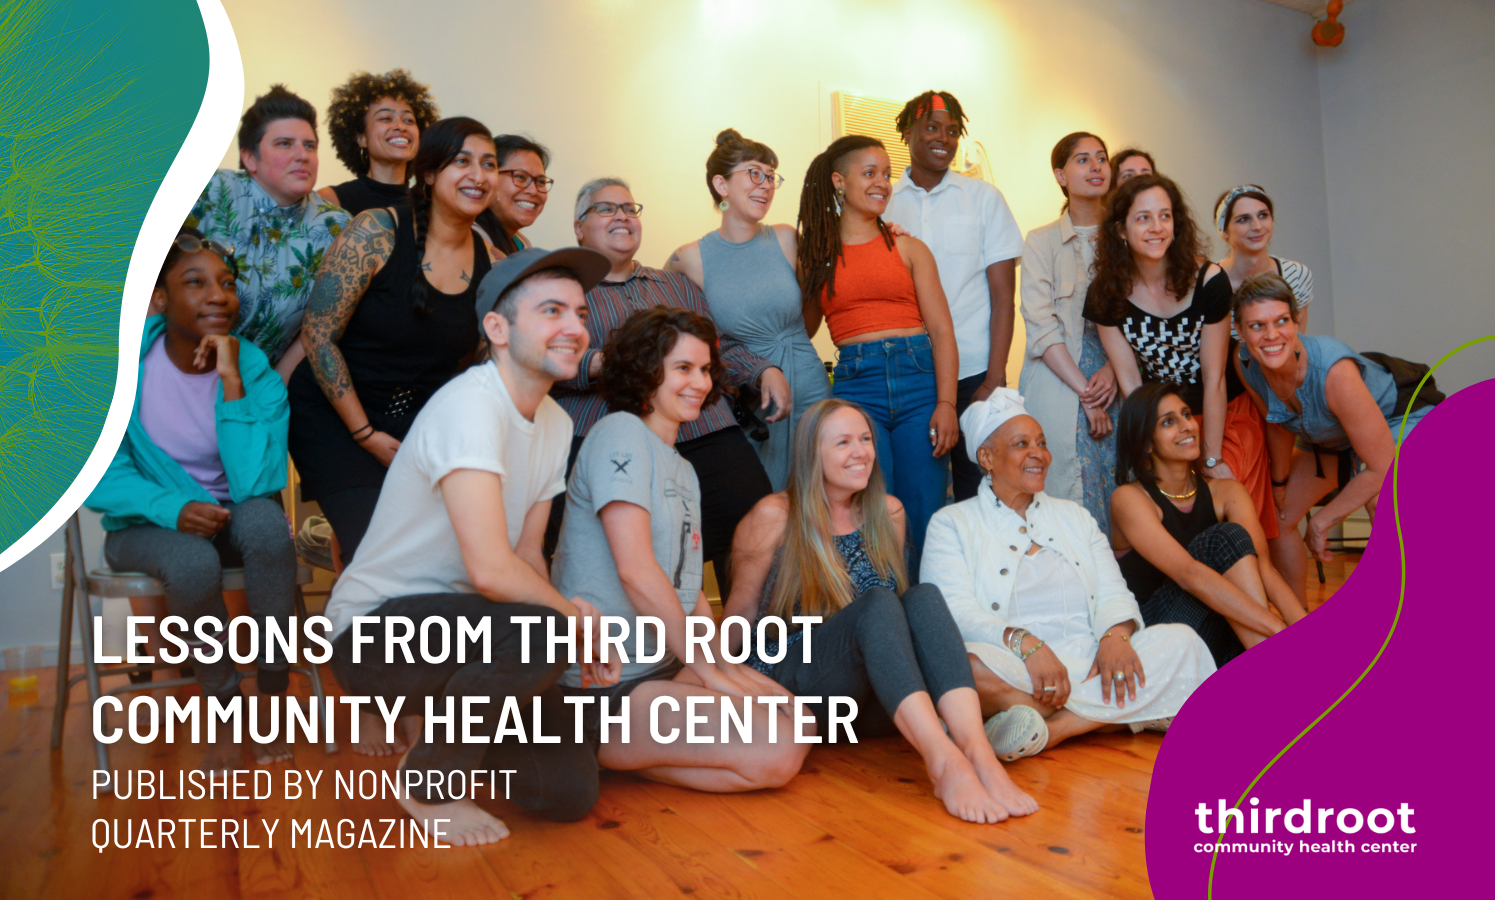 staff and community members smile for a group photo, some seated and some standing behind them, in Third Root's main practice room. The words "Lessons from Third Root Community Health Center, Published by Nonprofit Quarterly Magazine" appear on the bottom left, while Third Root's logo is on the right. Two squiggly blobs appear on either side of the photo, one teal with a dandelion flower, the other fuchsia.